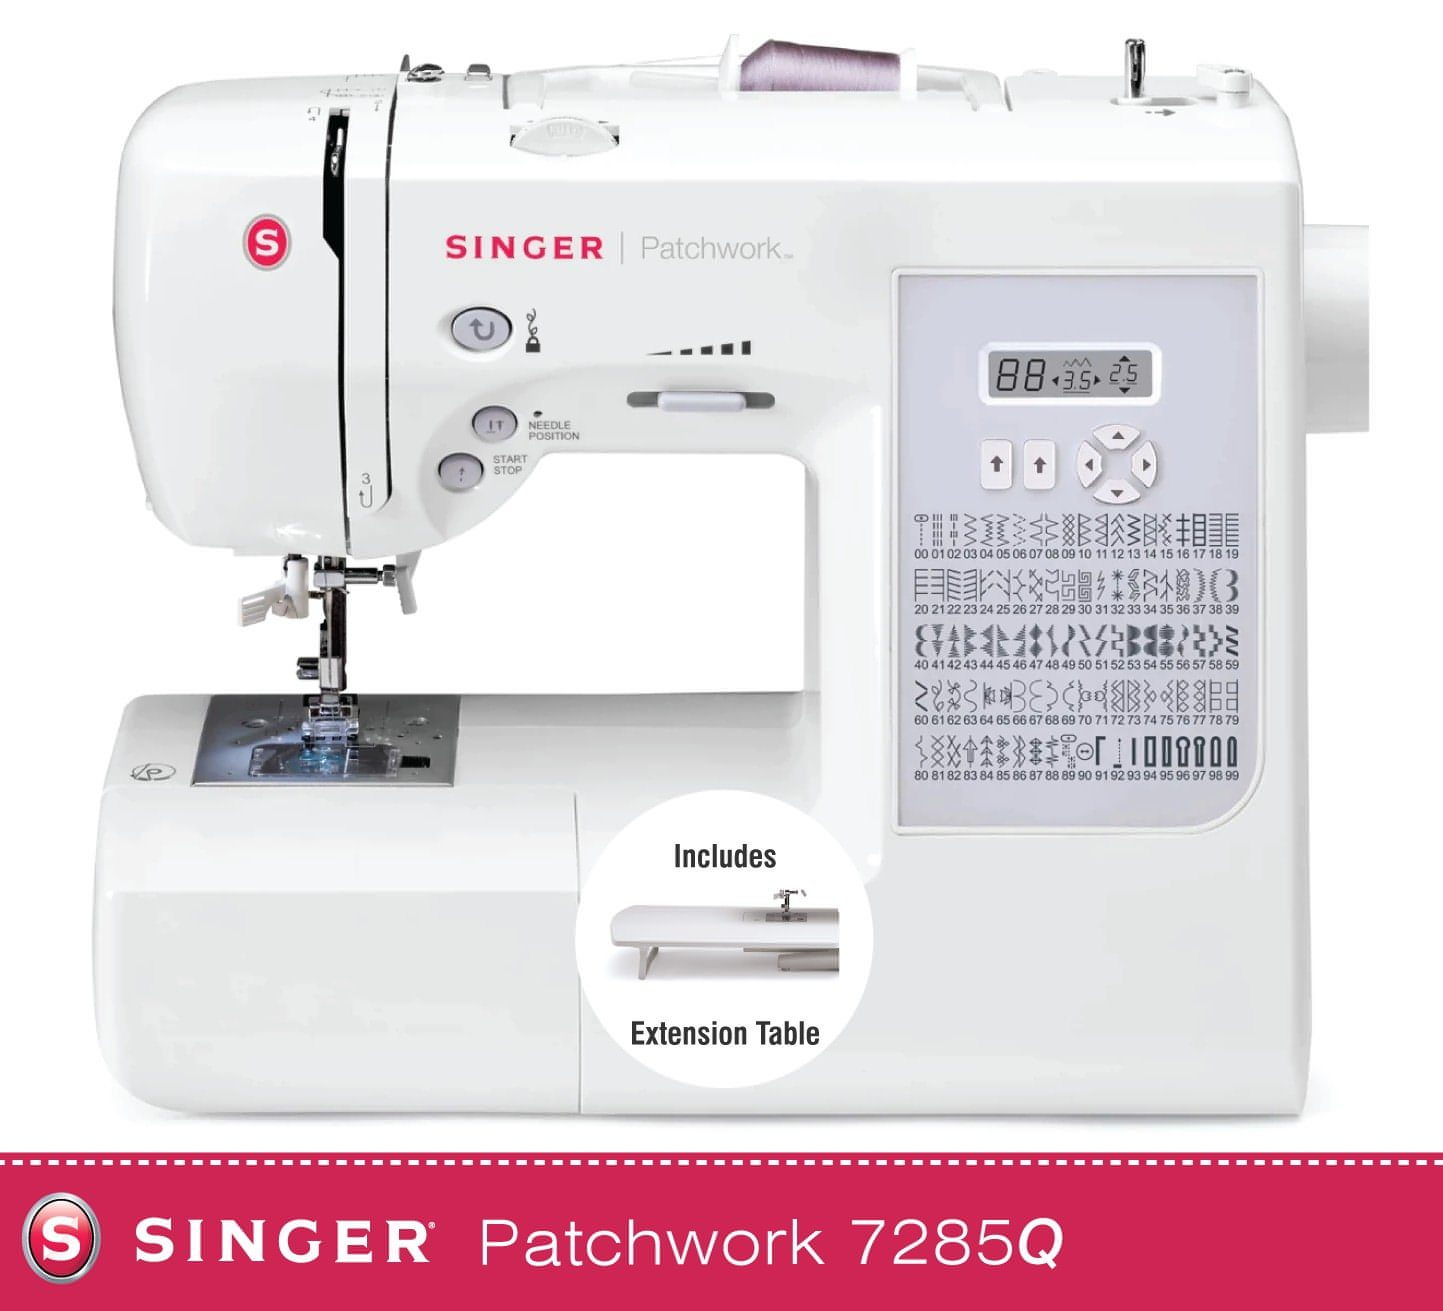 Singer 7285Q Patchwork Sewing Machine with Quilting Extension table - FREE Upgrade to new Patchwork Plus C5985Q